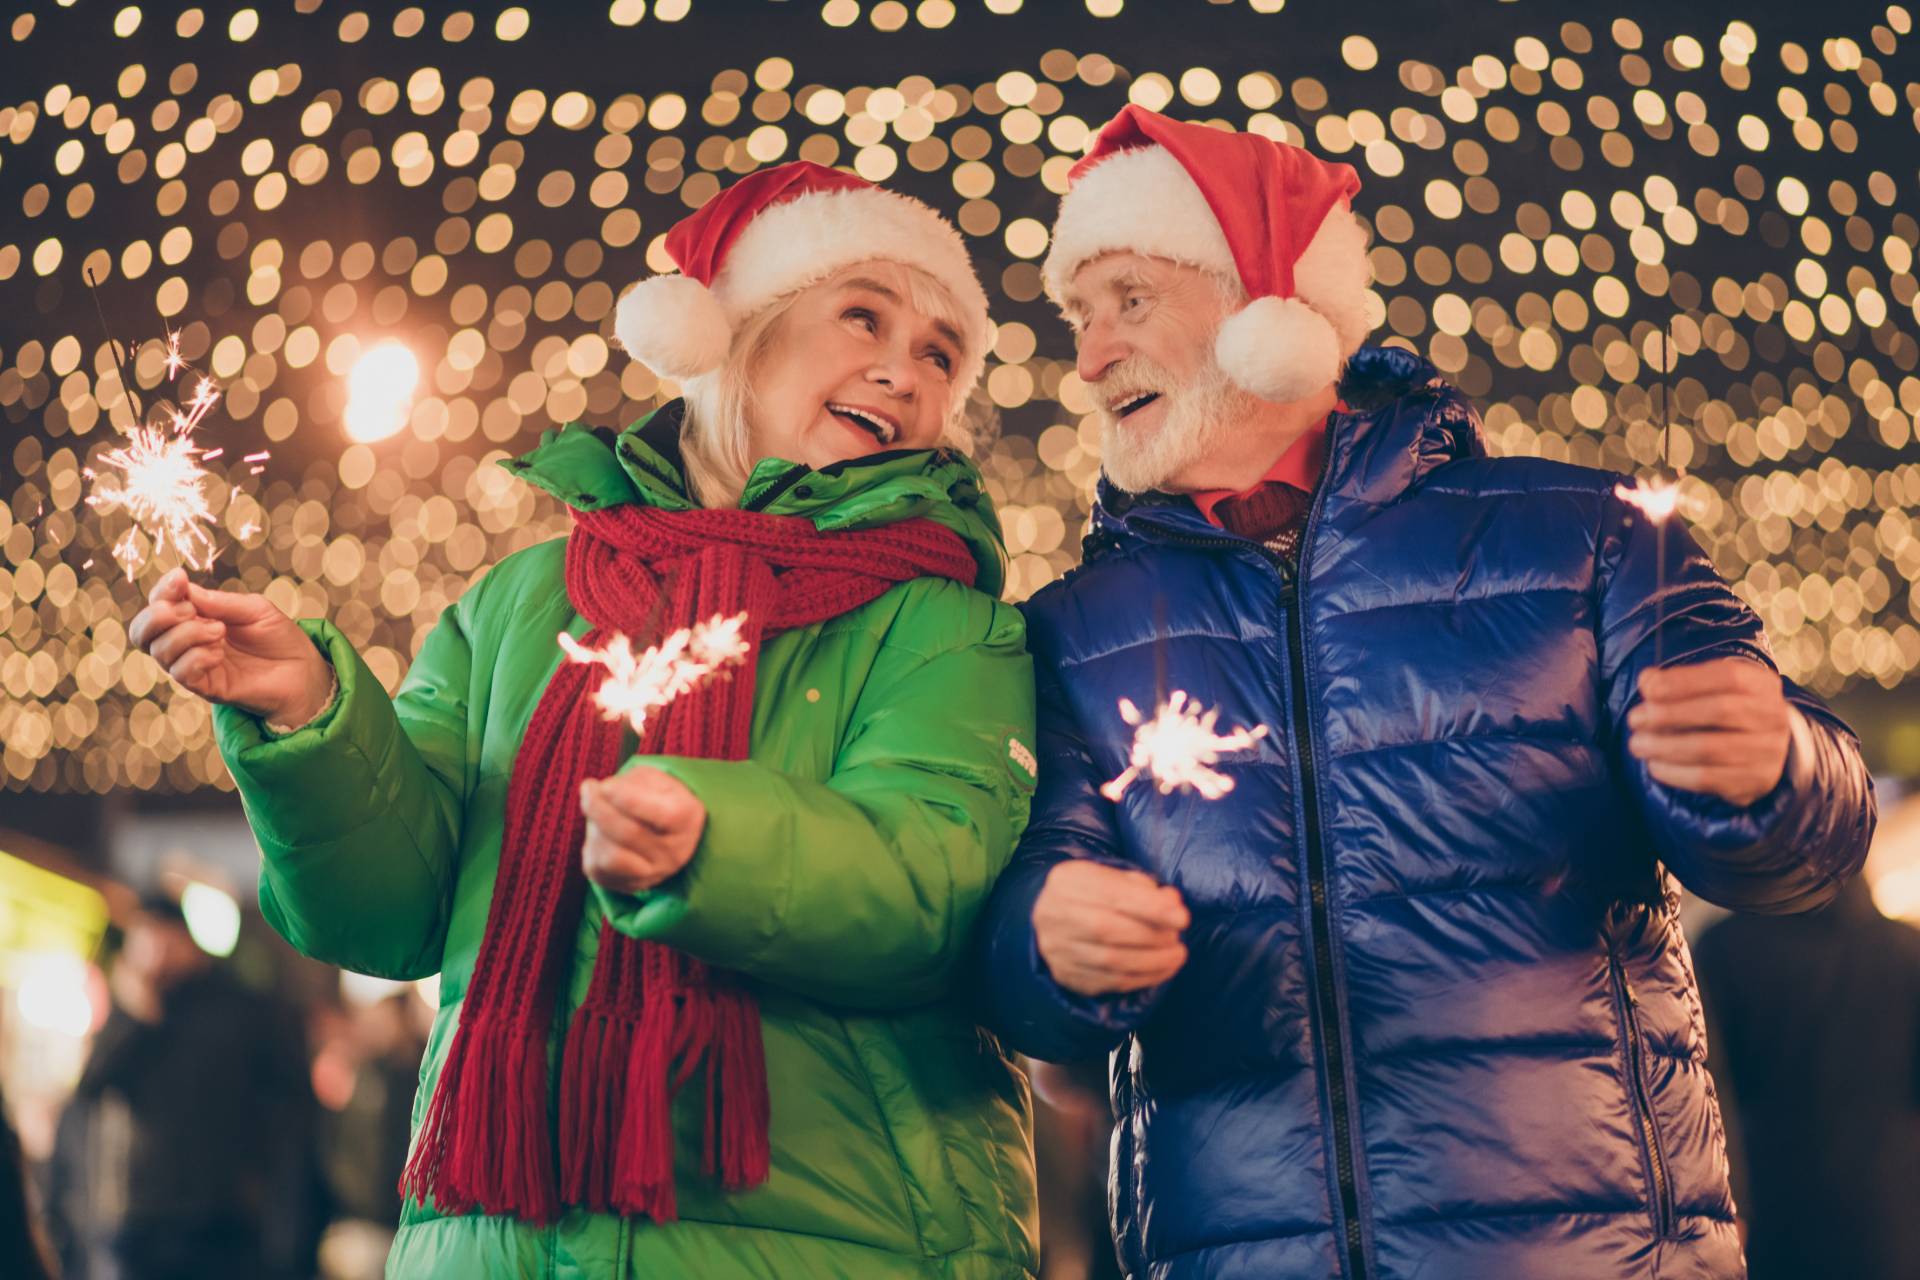 An elderly man and woman holding sparklers while standing in front of Christmas lights. They are wearing winter coats and Santa hats.